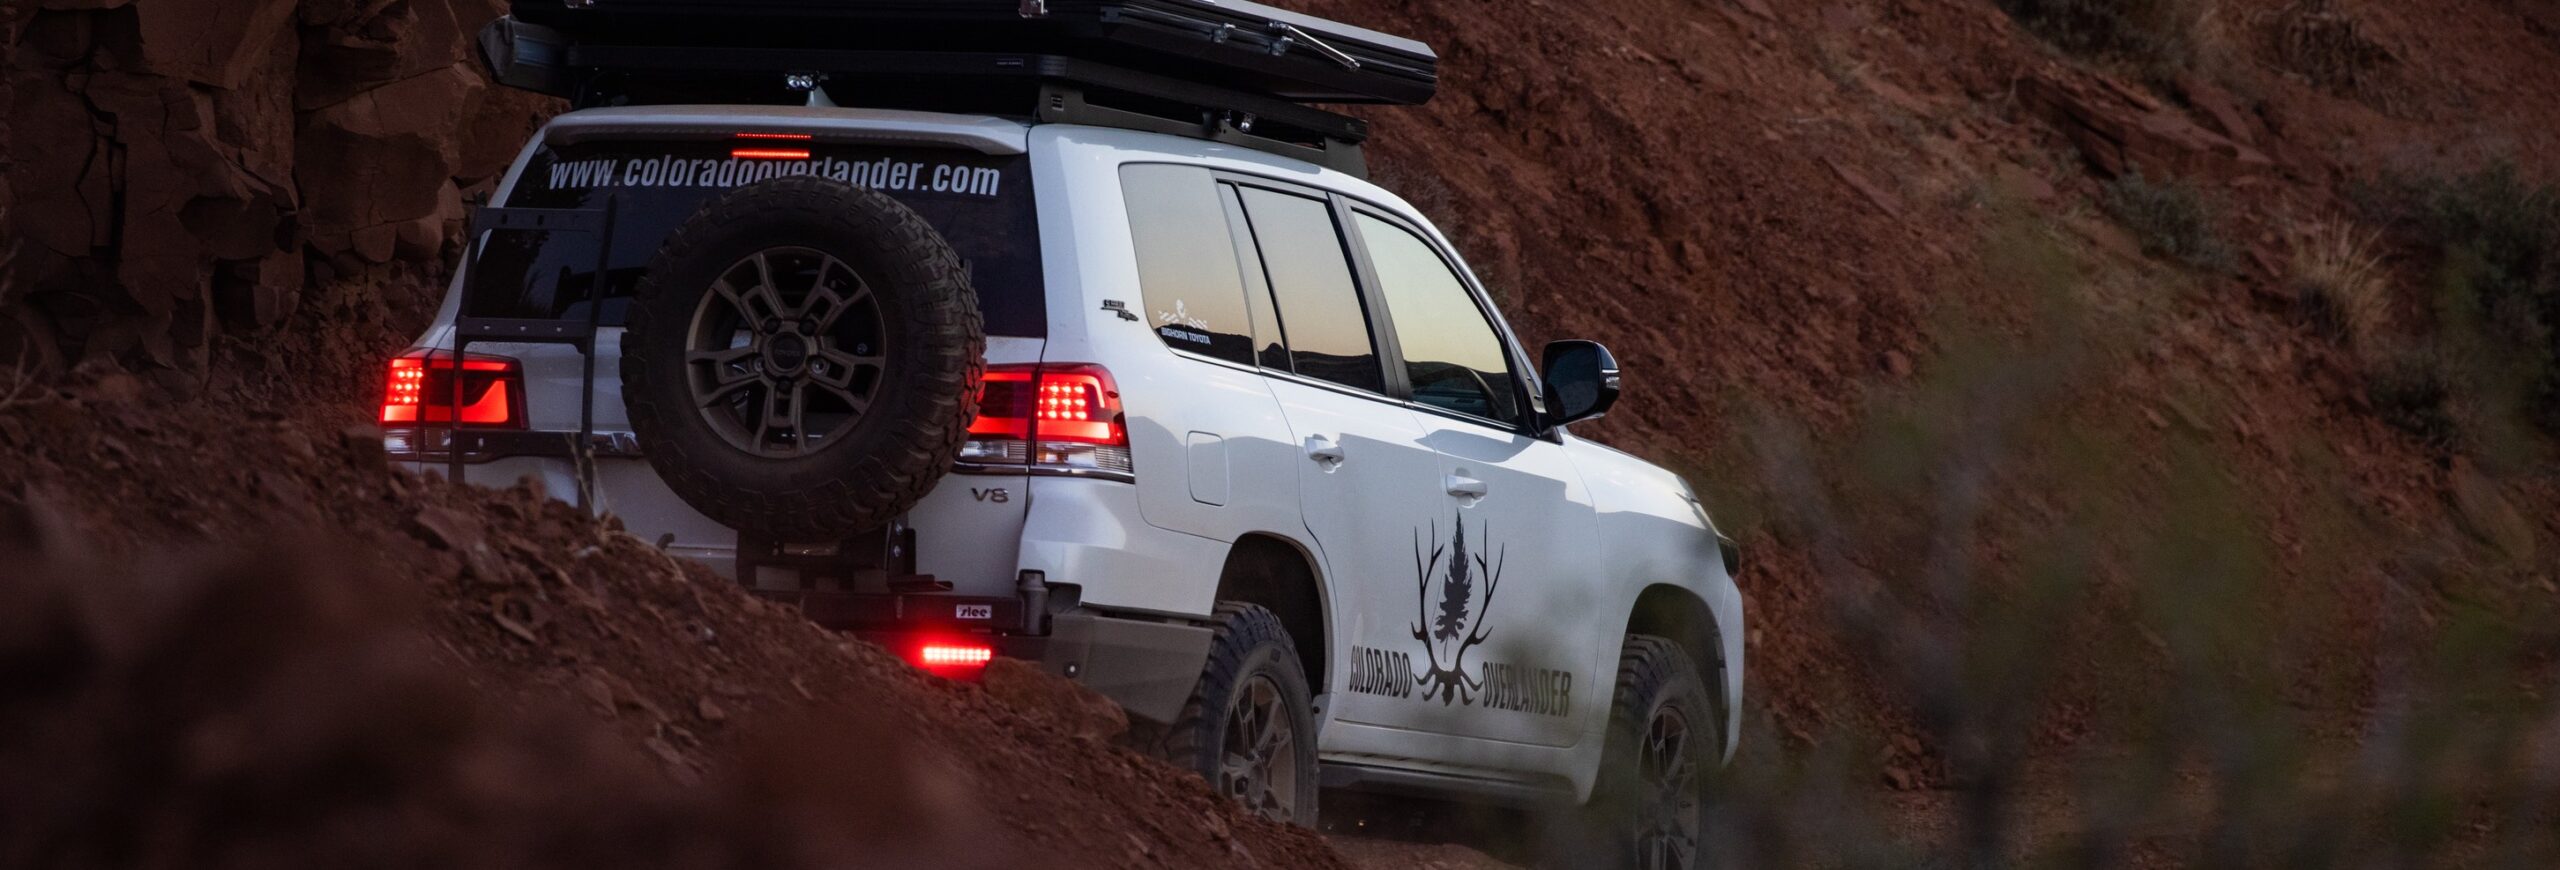 In this close-up photo, Colorado Overlander's Land Cruiser confidently navigates a vibrant red dirt road. The details are crystal clear, revealing the distinct logo on the vehicle and the rooftop tent, emphasizing the rugged and adventurous spirit embodied by this exploration-ready setup.